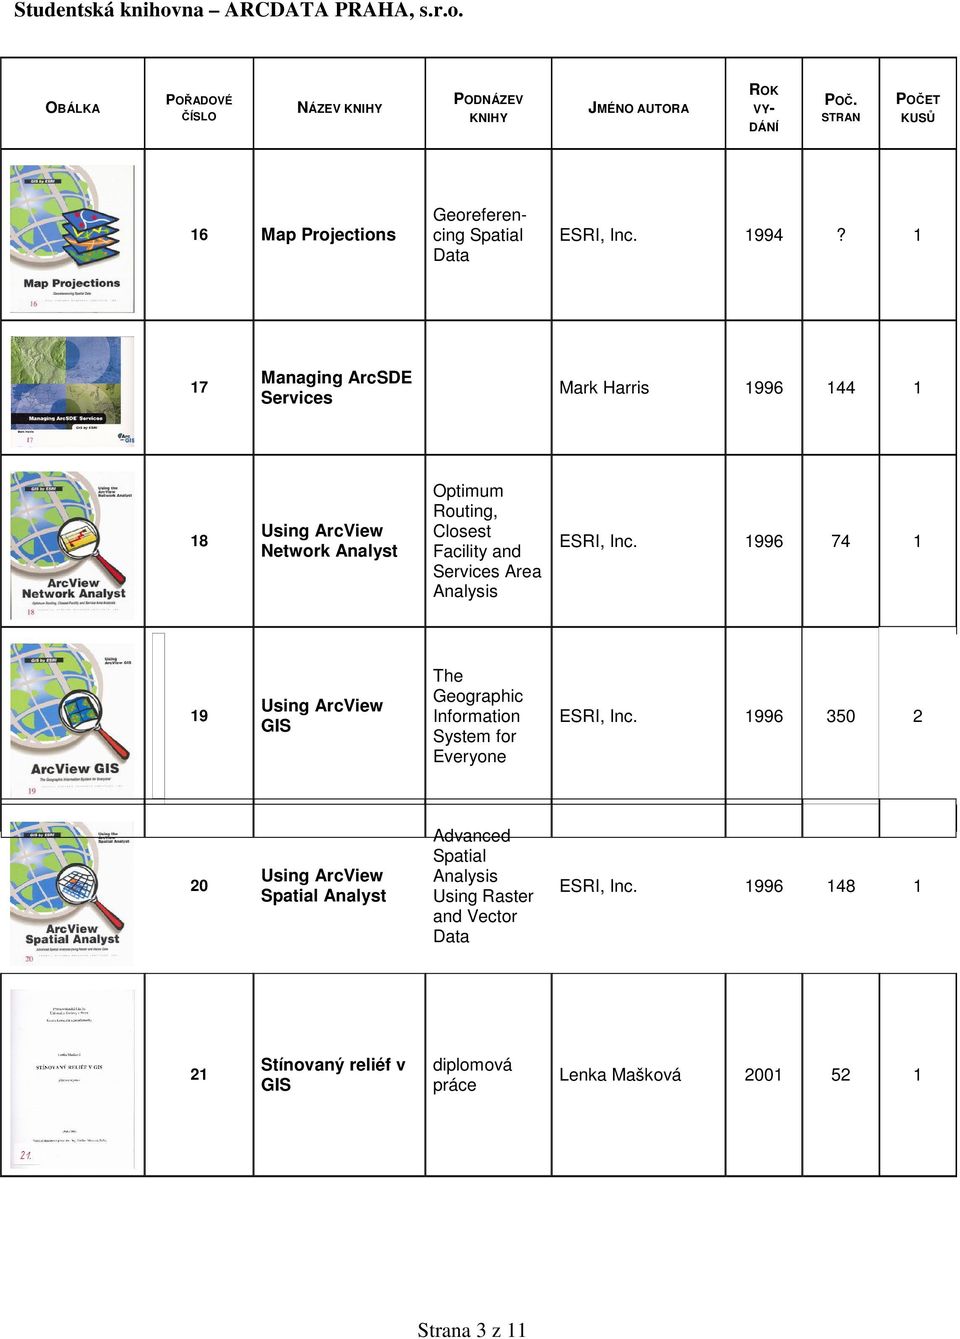 Services Area Analysis ESRI, Inc. 1996 74 1 19 GIS The Geographic Information System for Everyone ESRI, Inc.